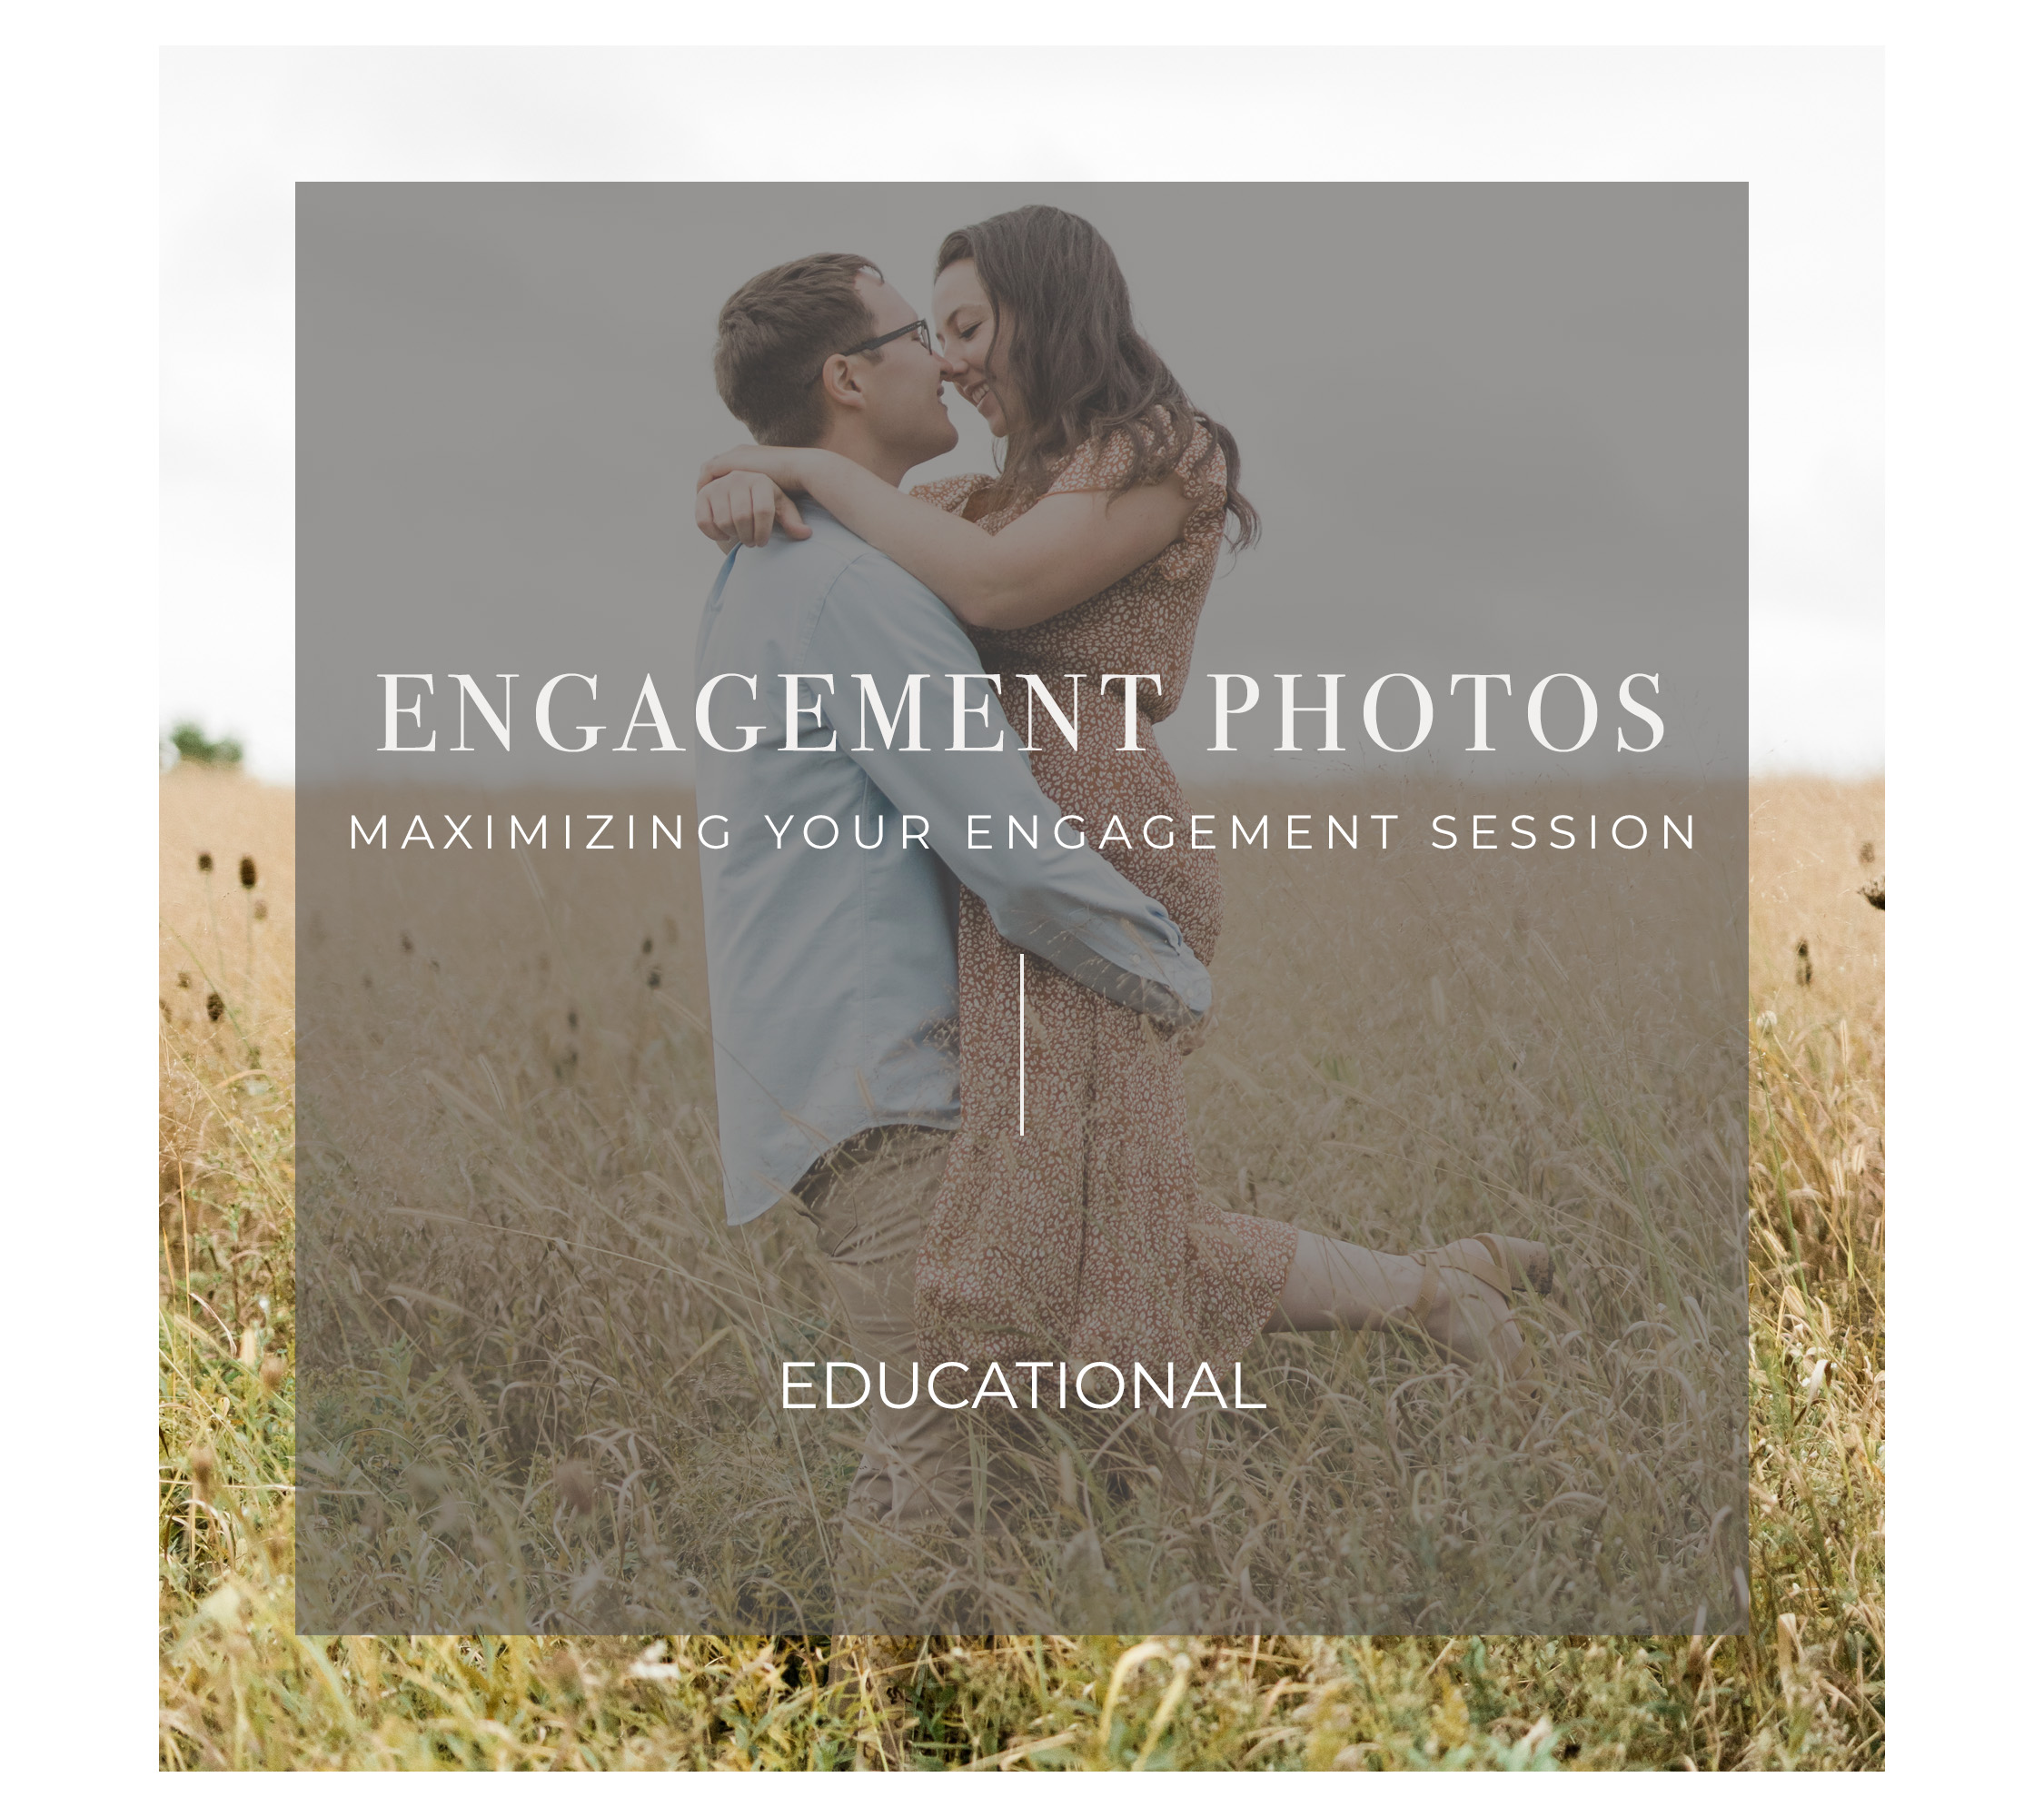 Guide Engagement Photos